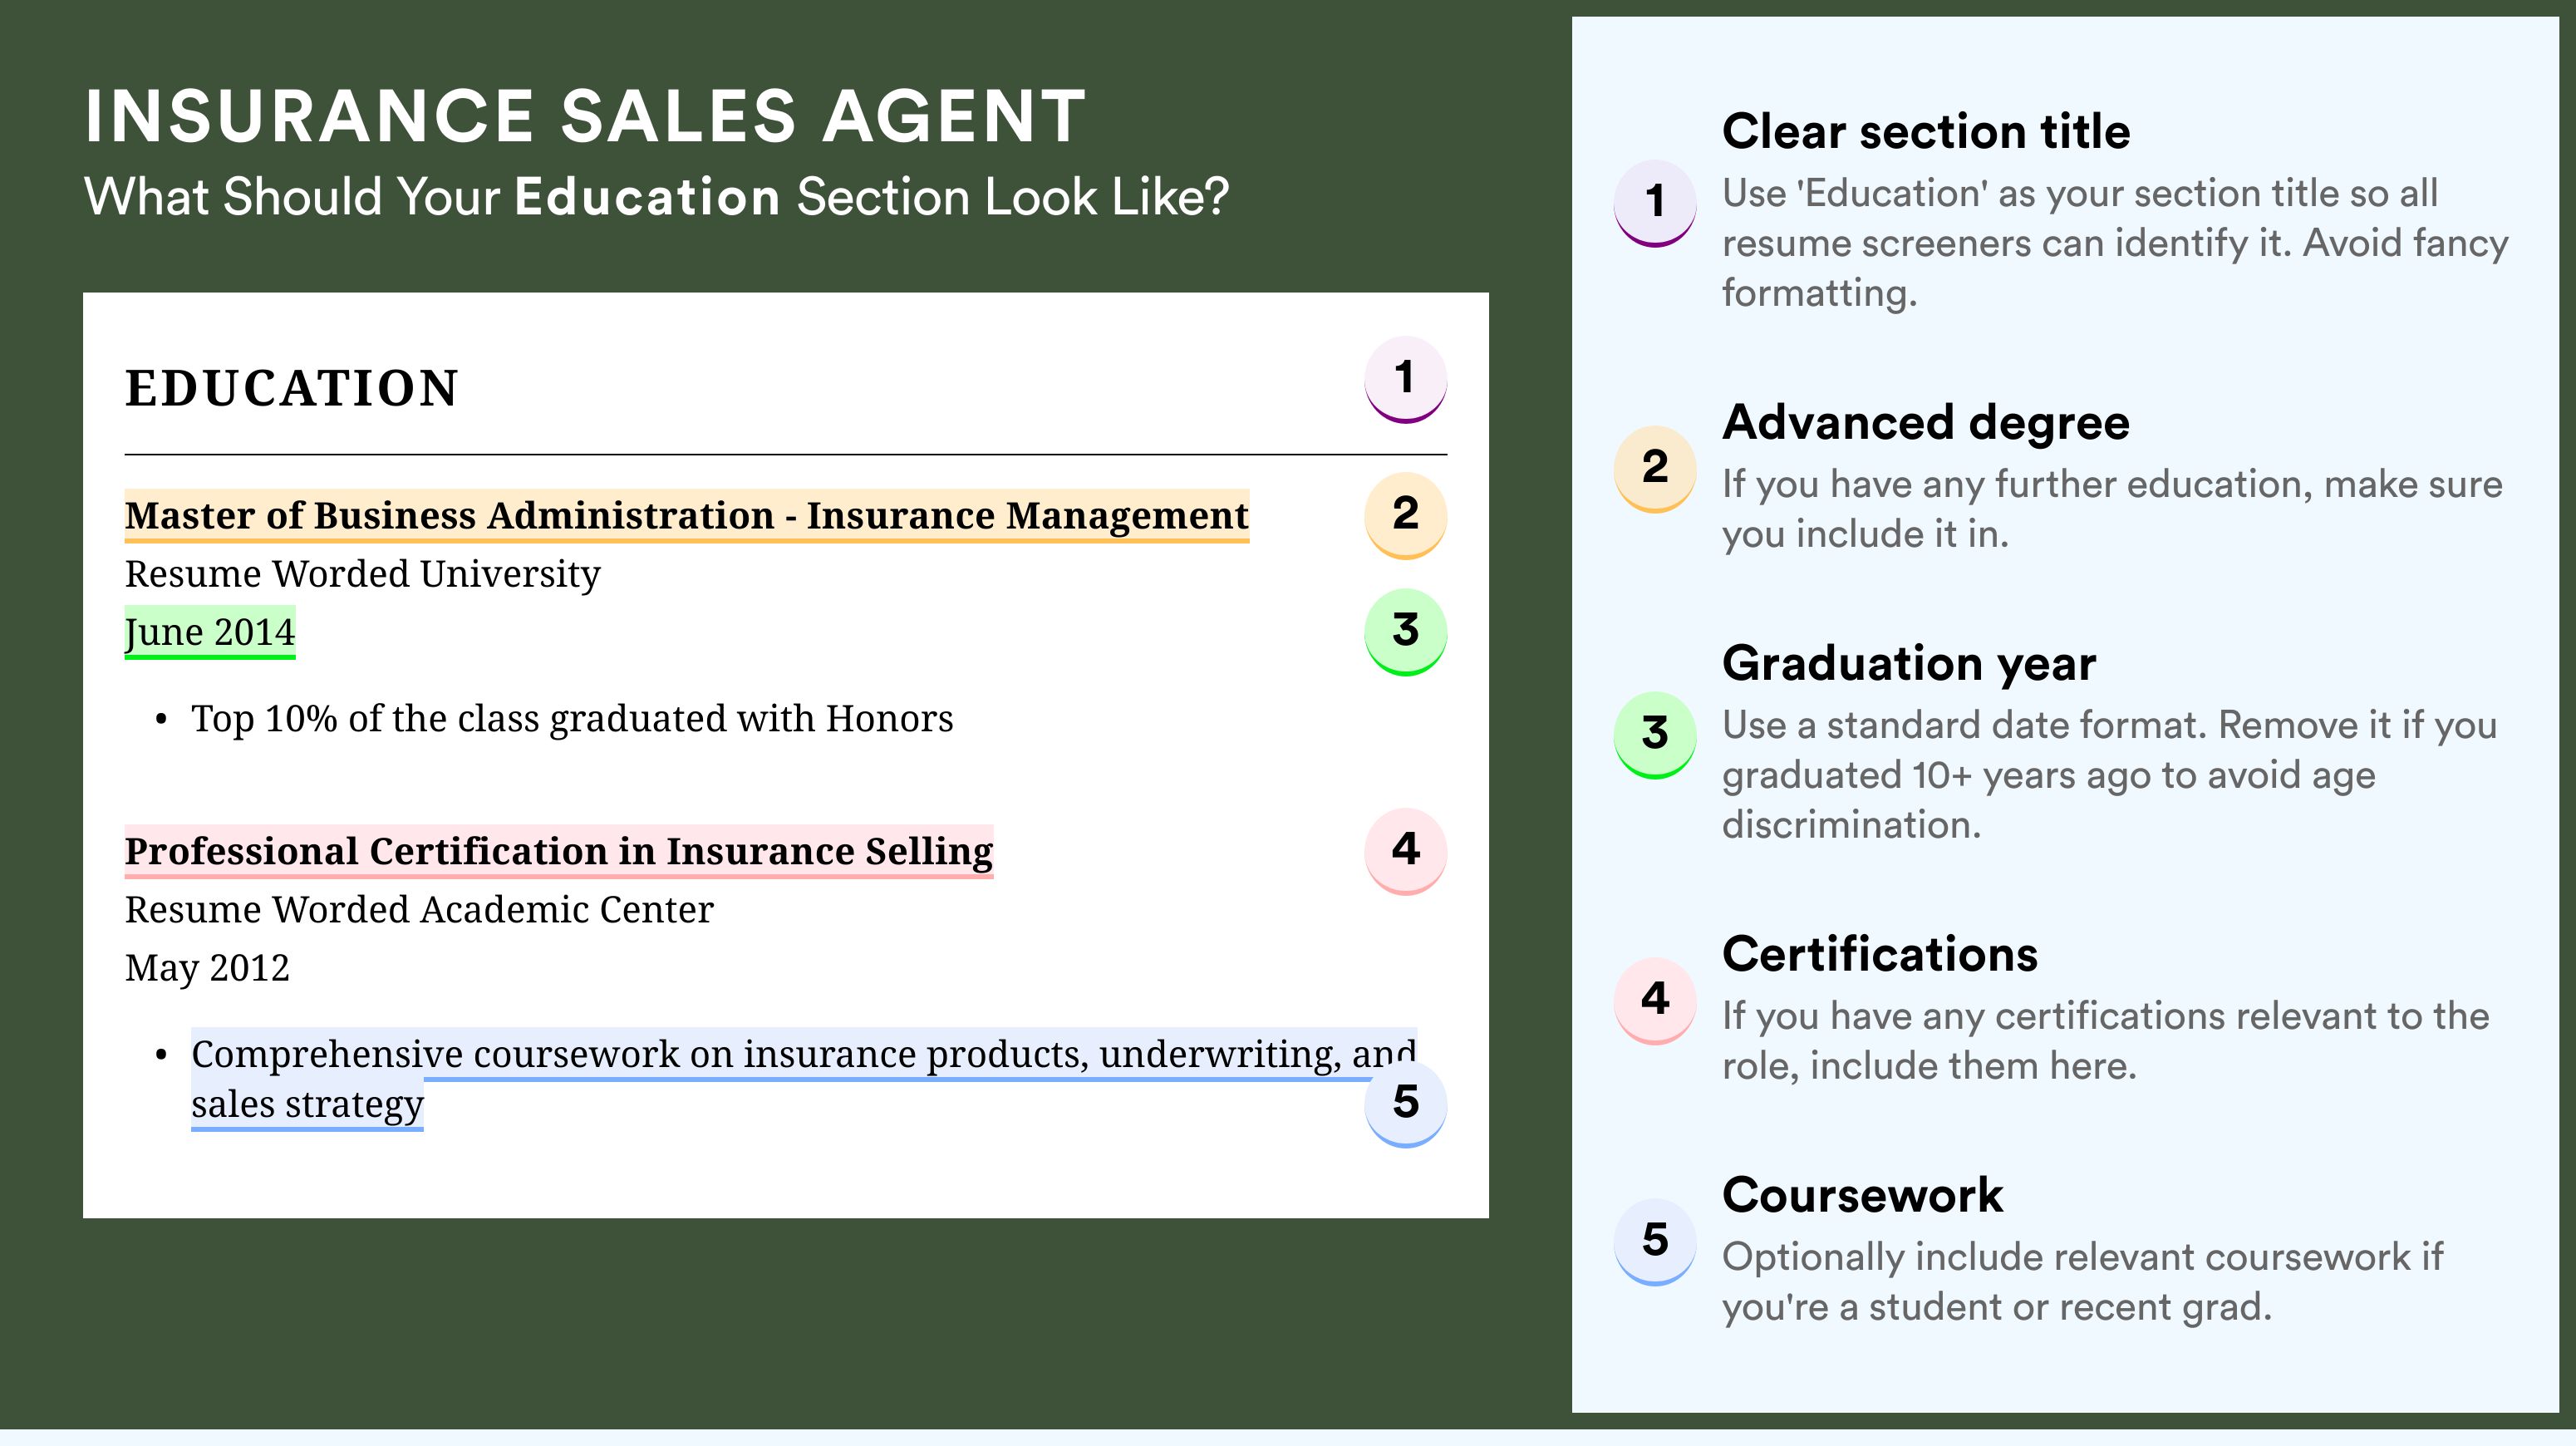 How To Write An Education Section - Insurance Sales Agent Roles